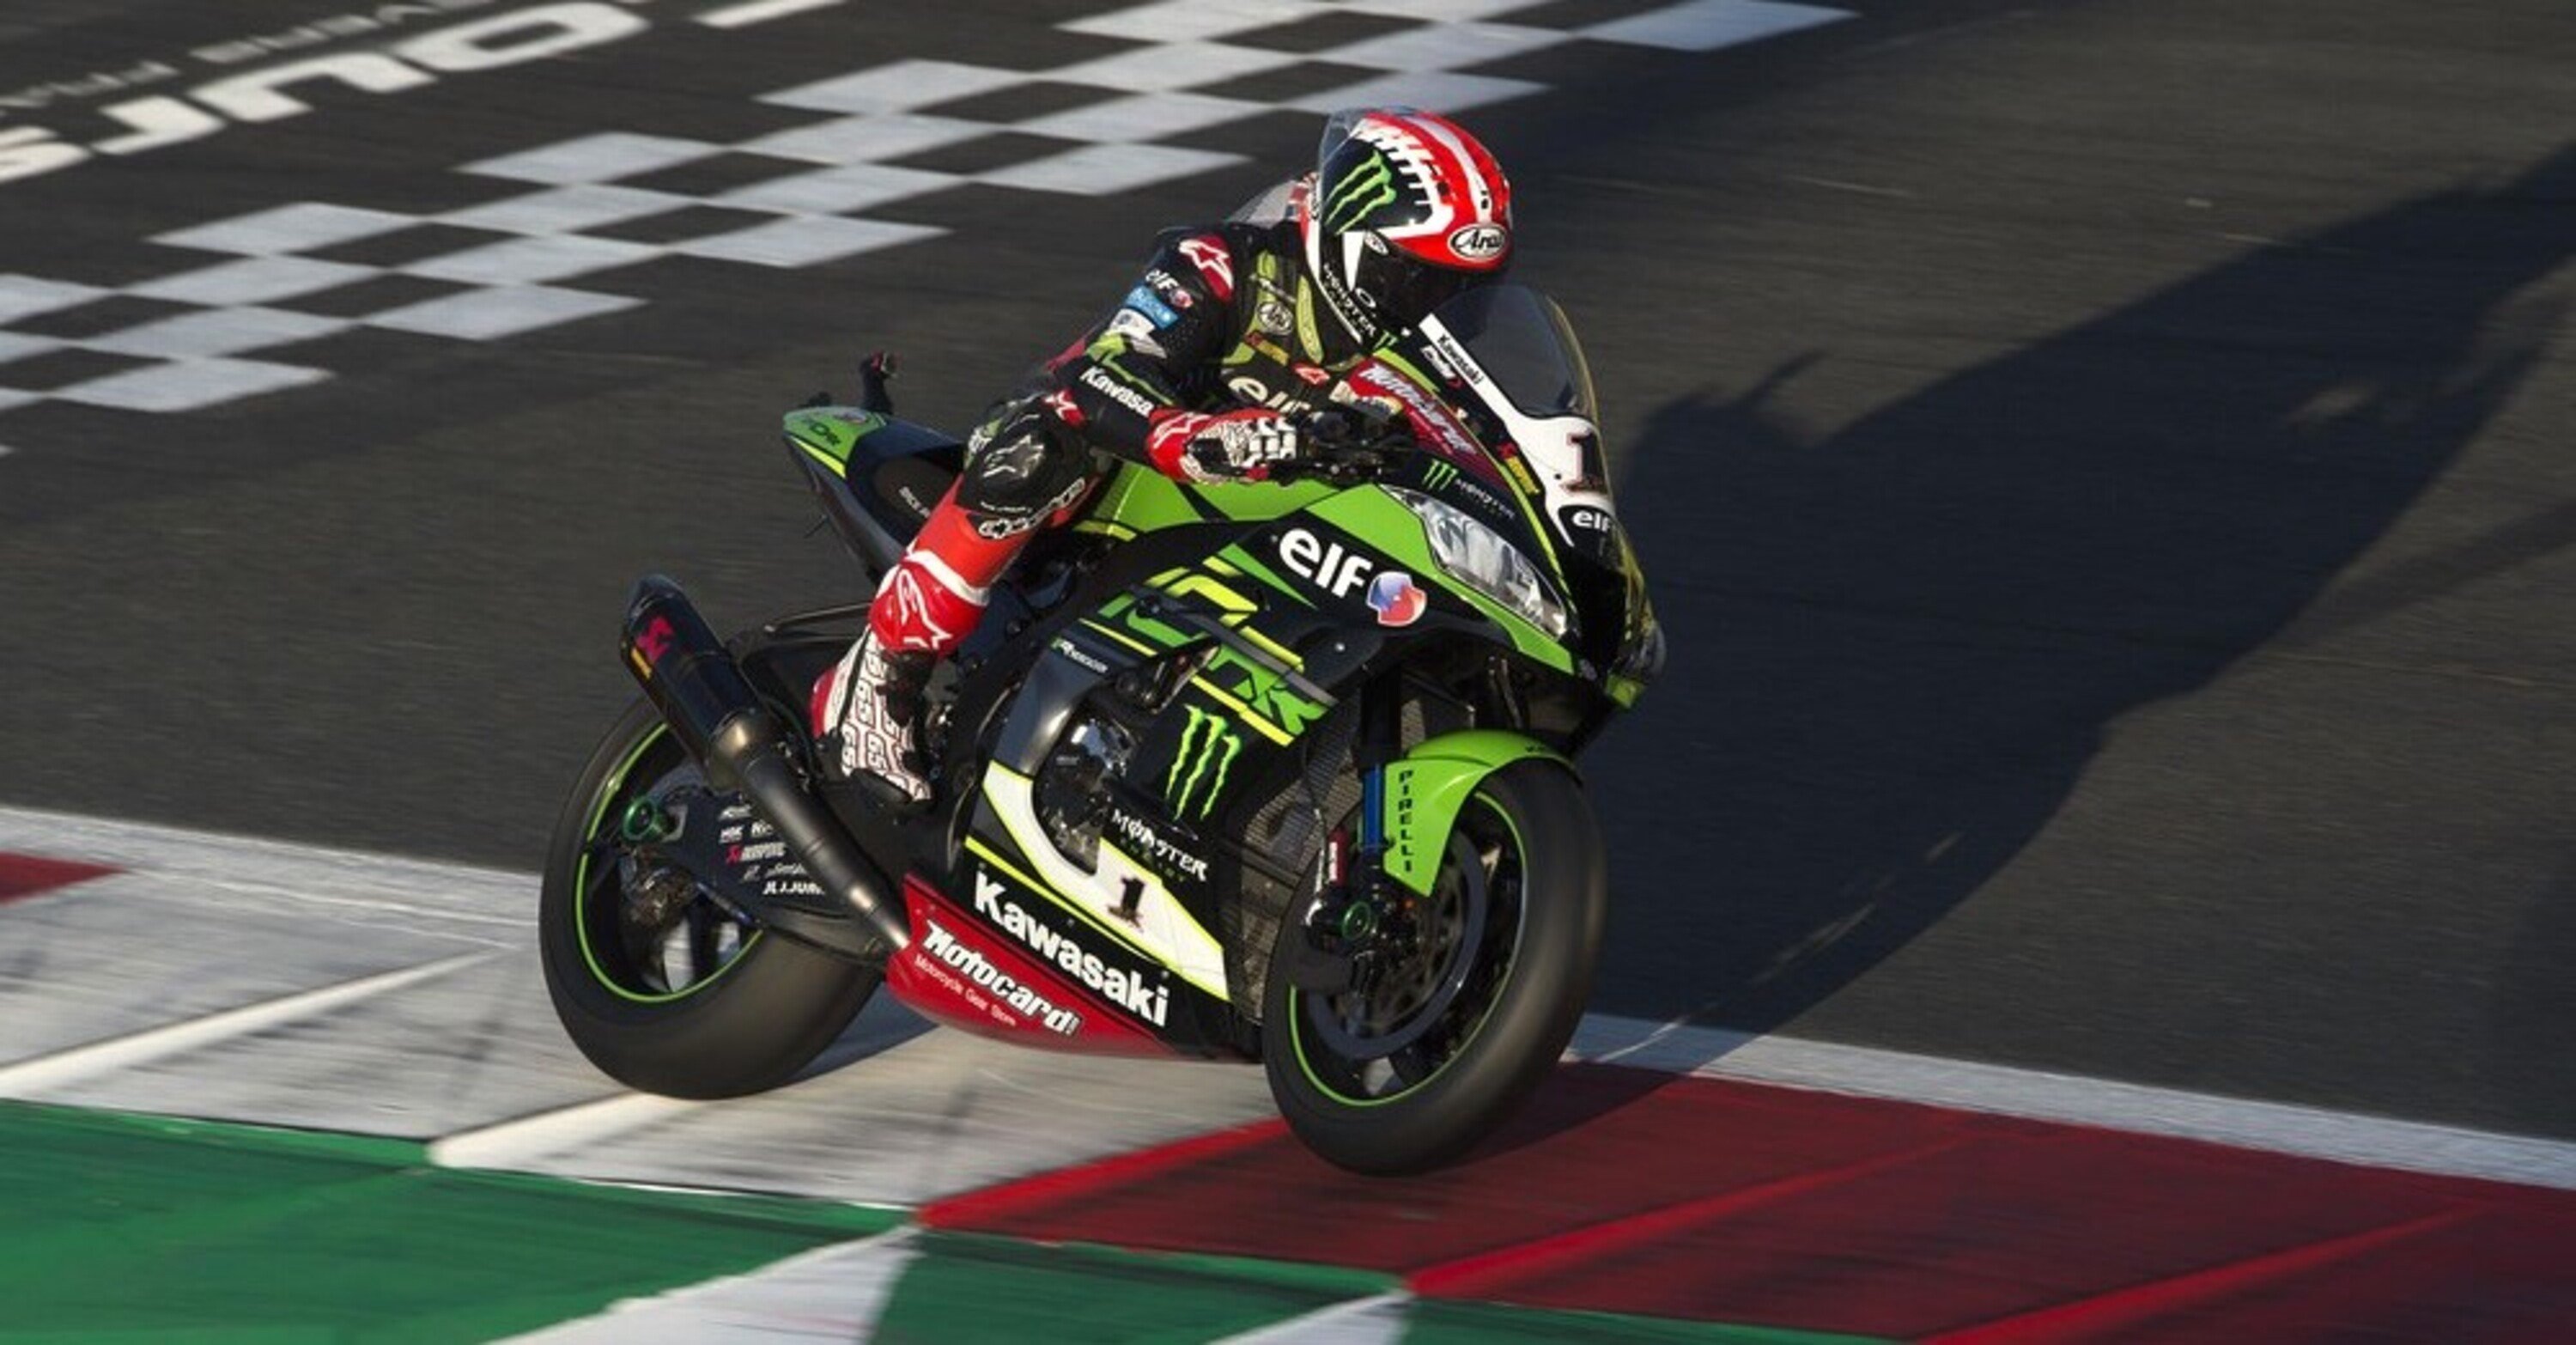 SBK 2019, Magny Cours. Rea gi&agrave; campione?